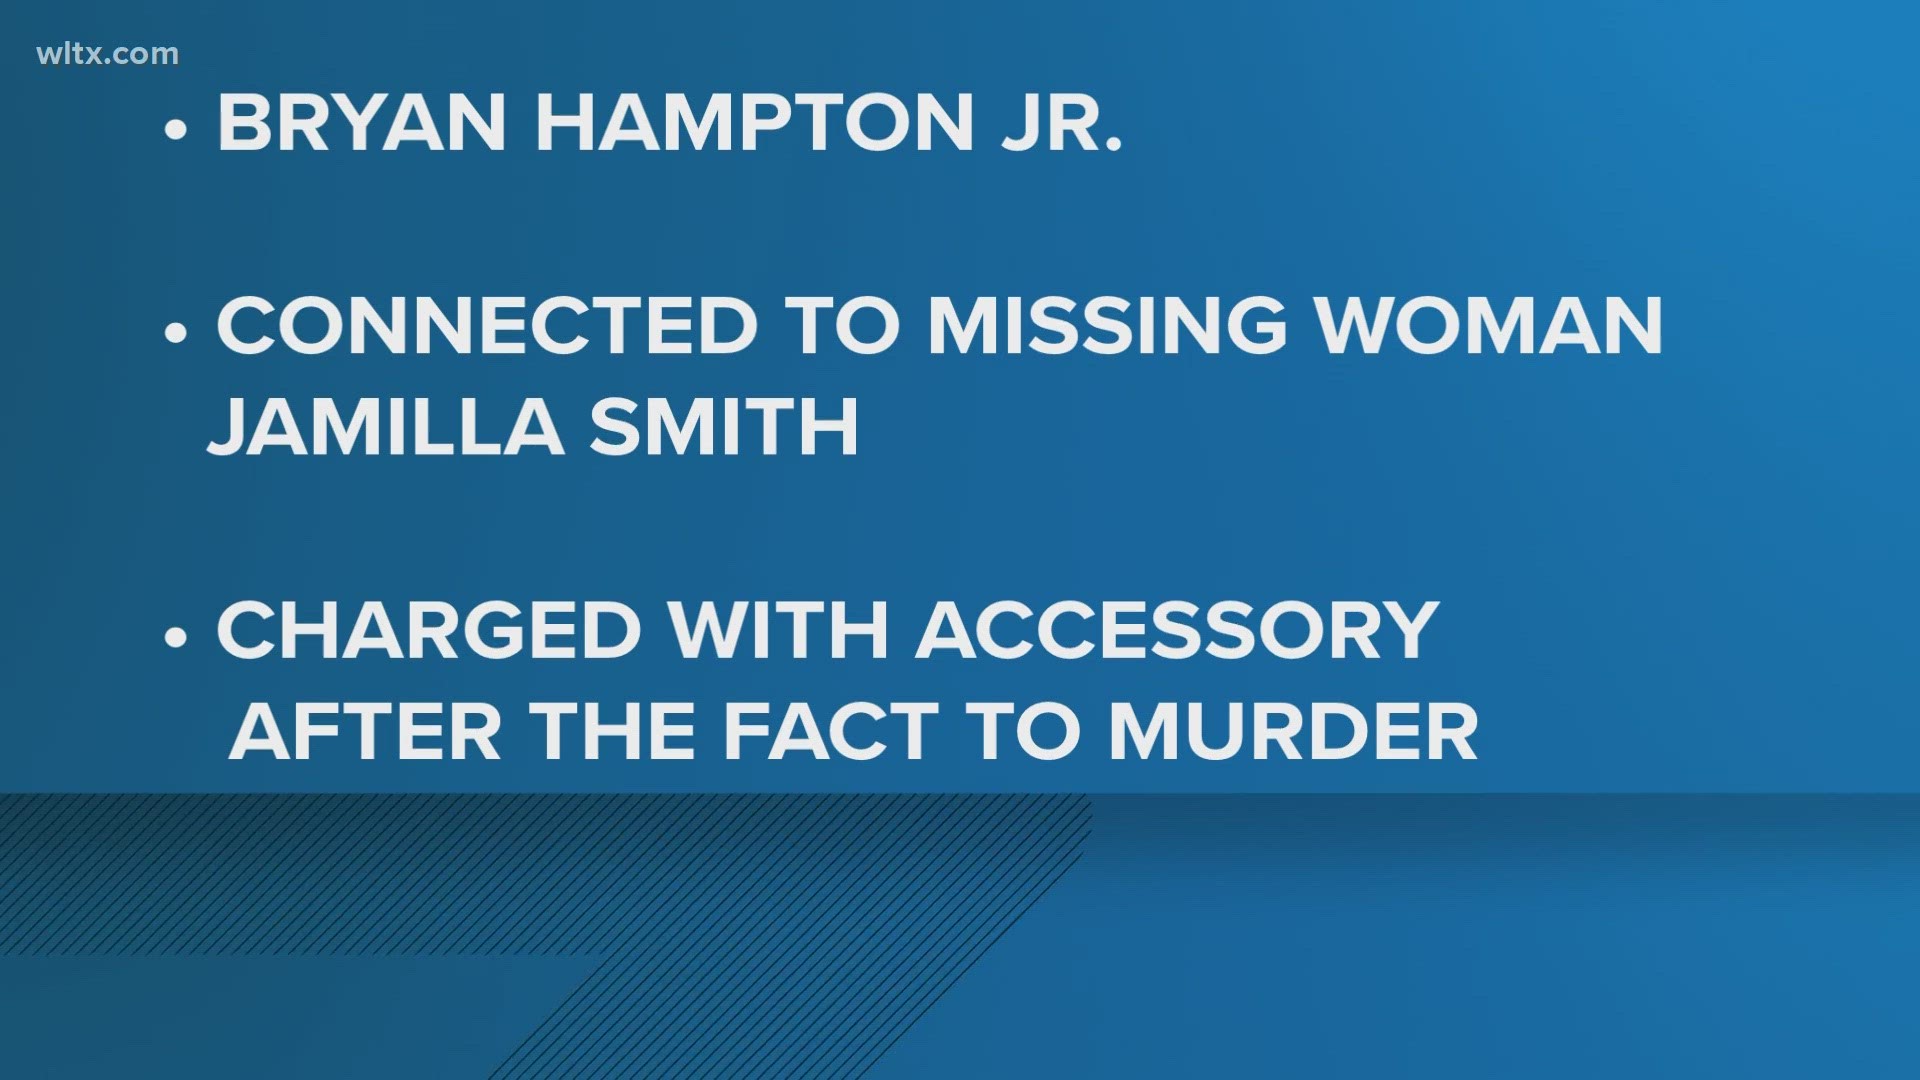 Bryan Alexander Hampton Jr. is the second person arrested in the investigation.